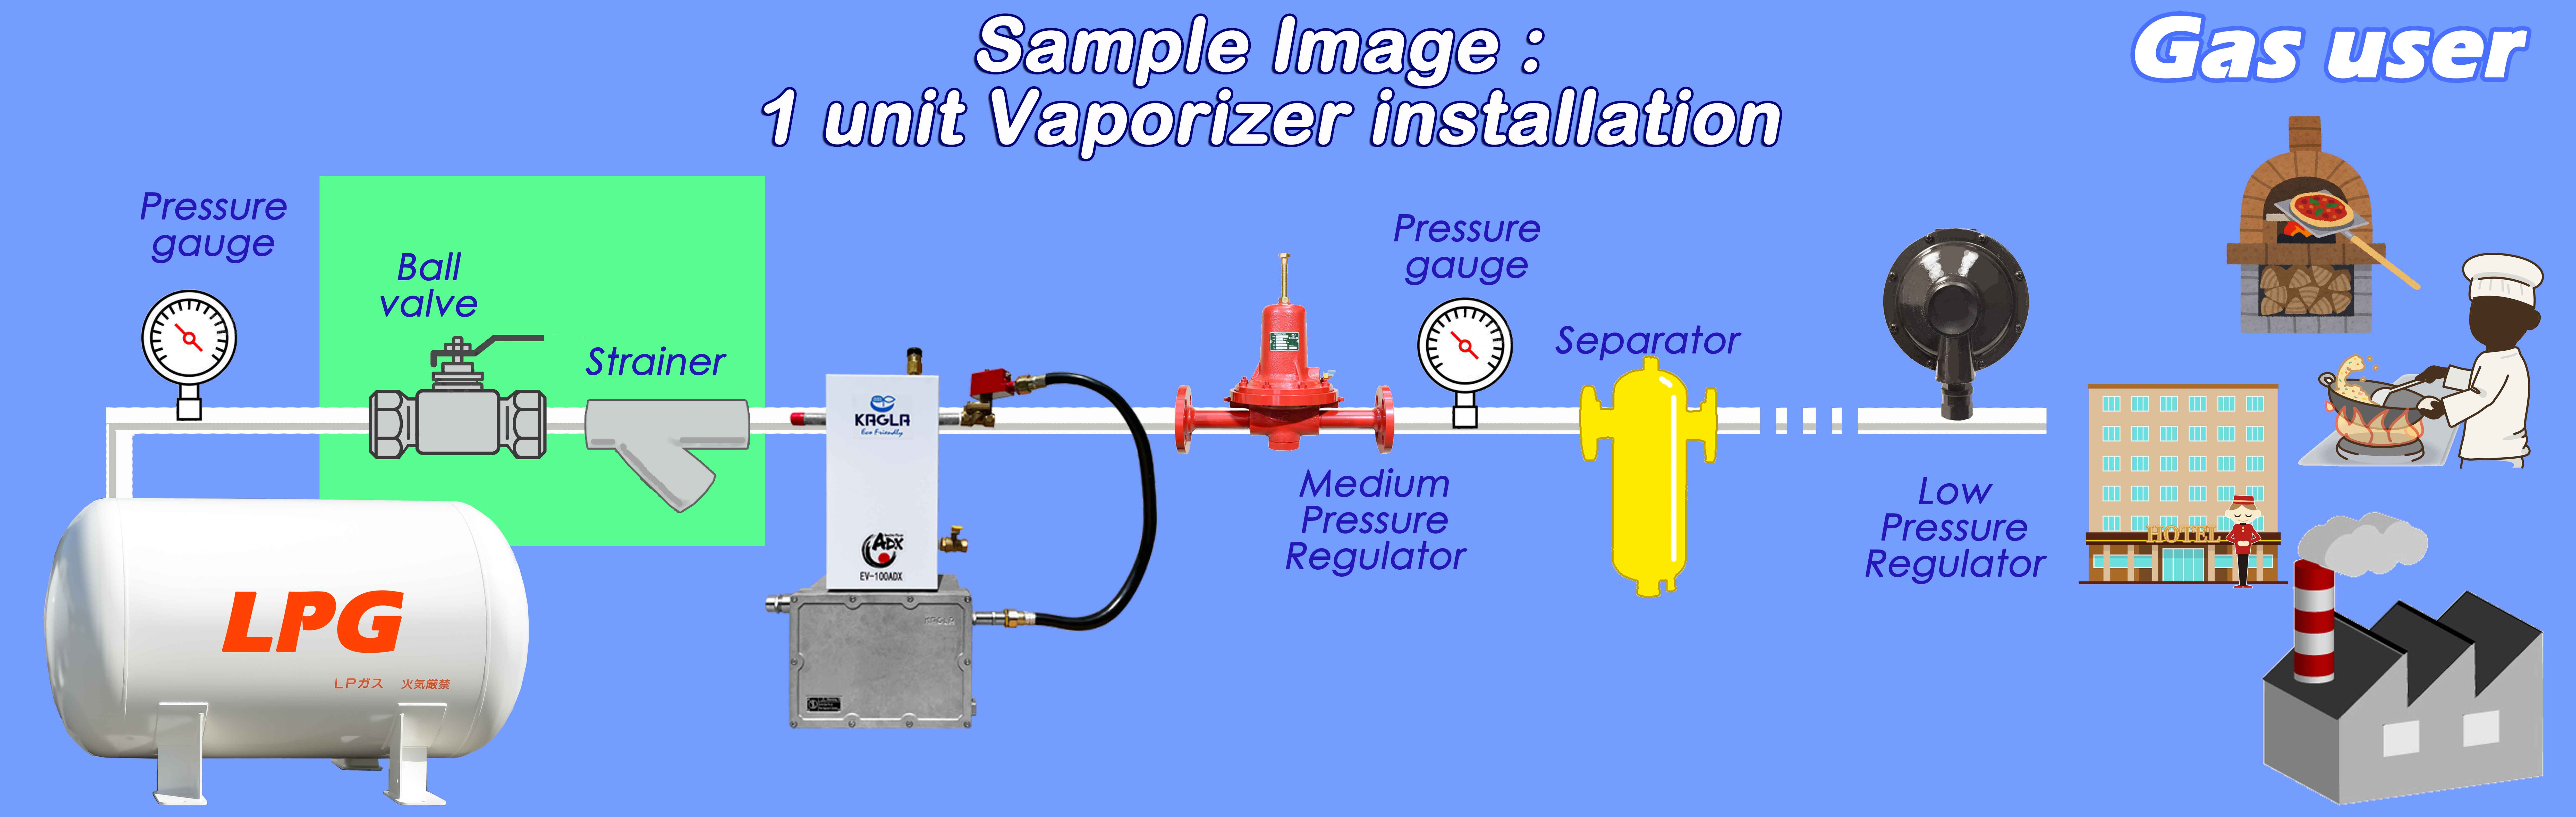 Sample installation image of 100ADX vaporizer and related LPG devices